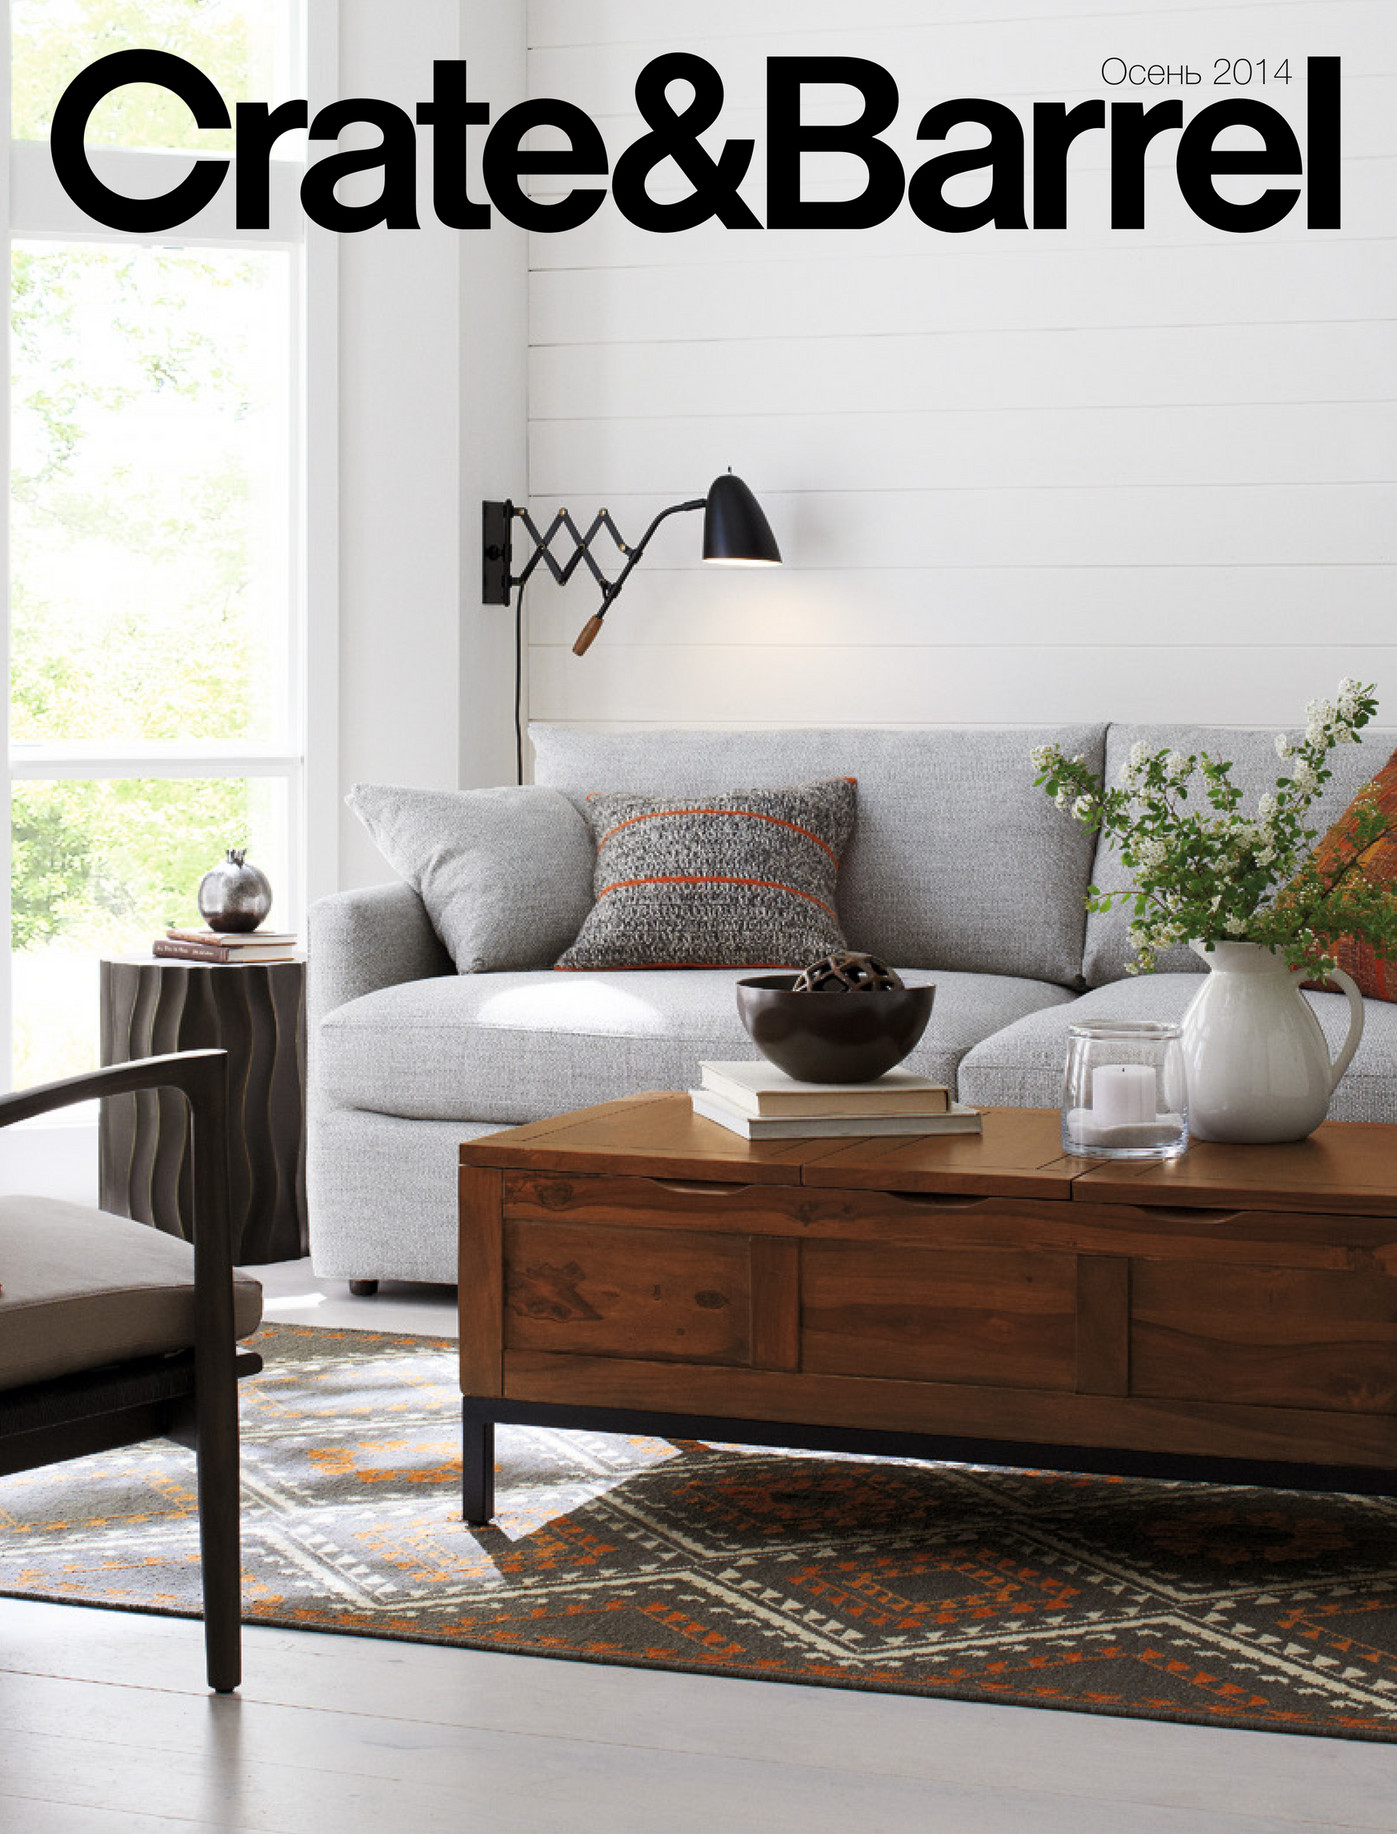 Crate and Barrel Russia - Autumn catalog 2014 - Страница 60 - Created with ...